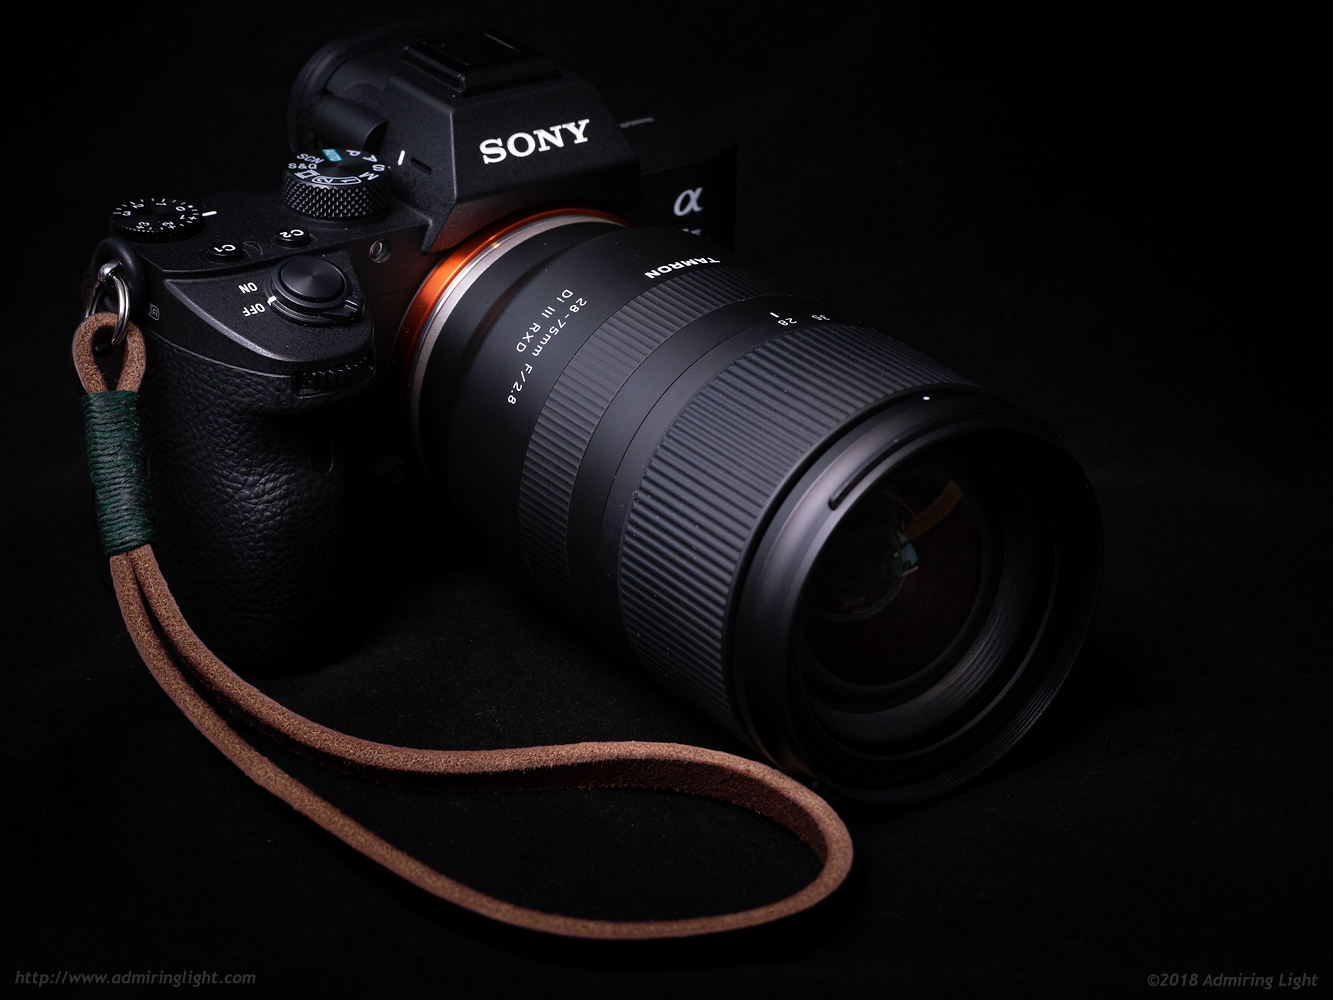 Review: Tamron 28-75mm f/2.8 Di III RXD (Sony E-Mount) - Page 3 of 